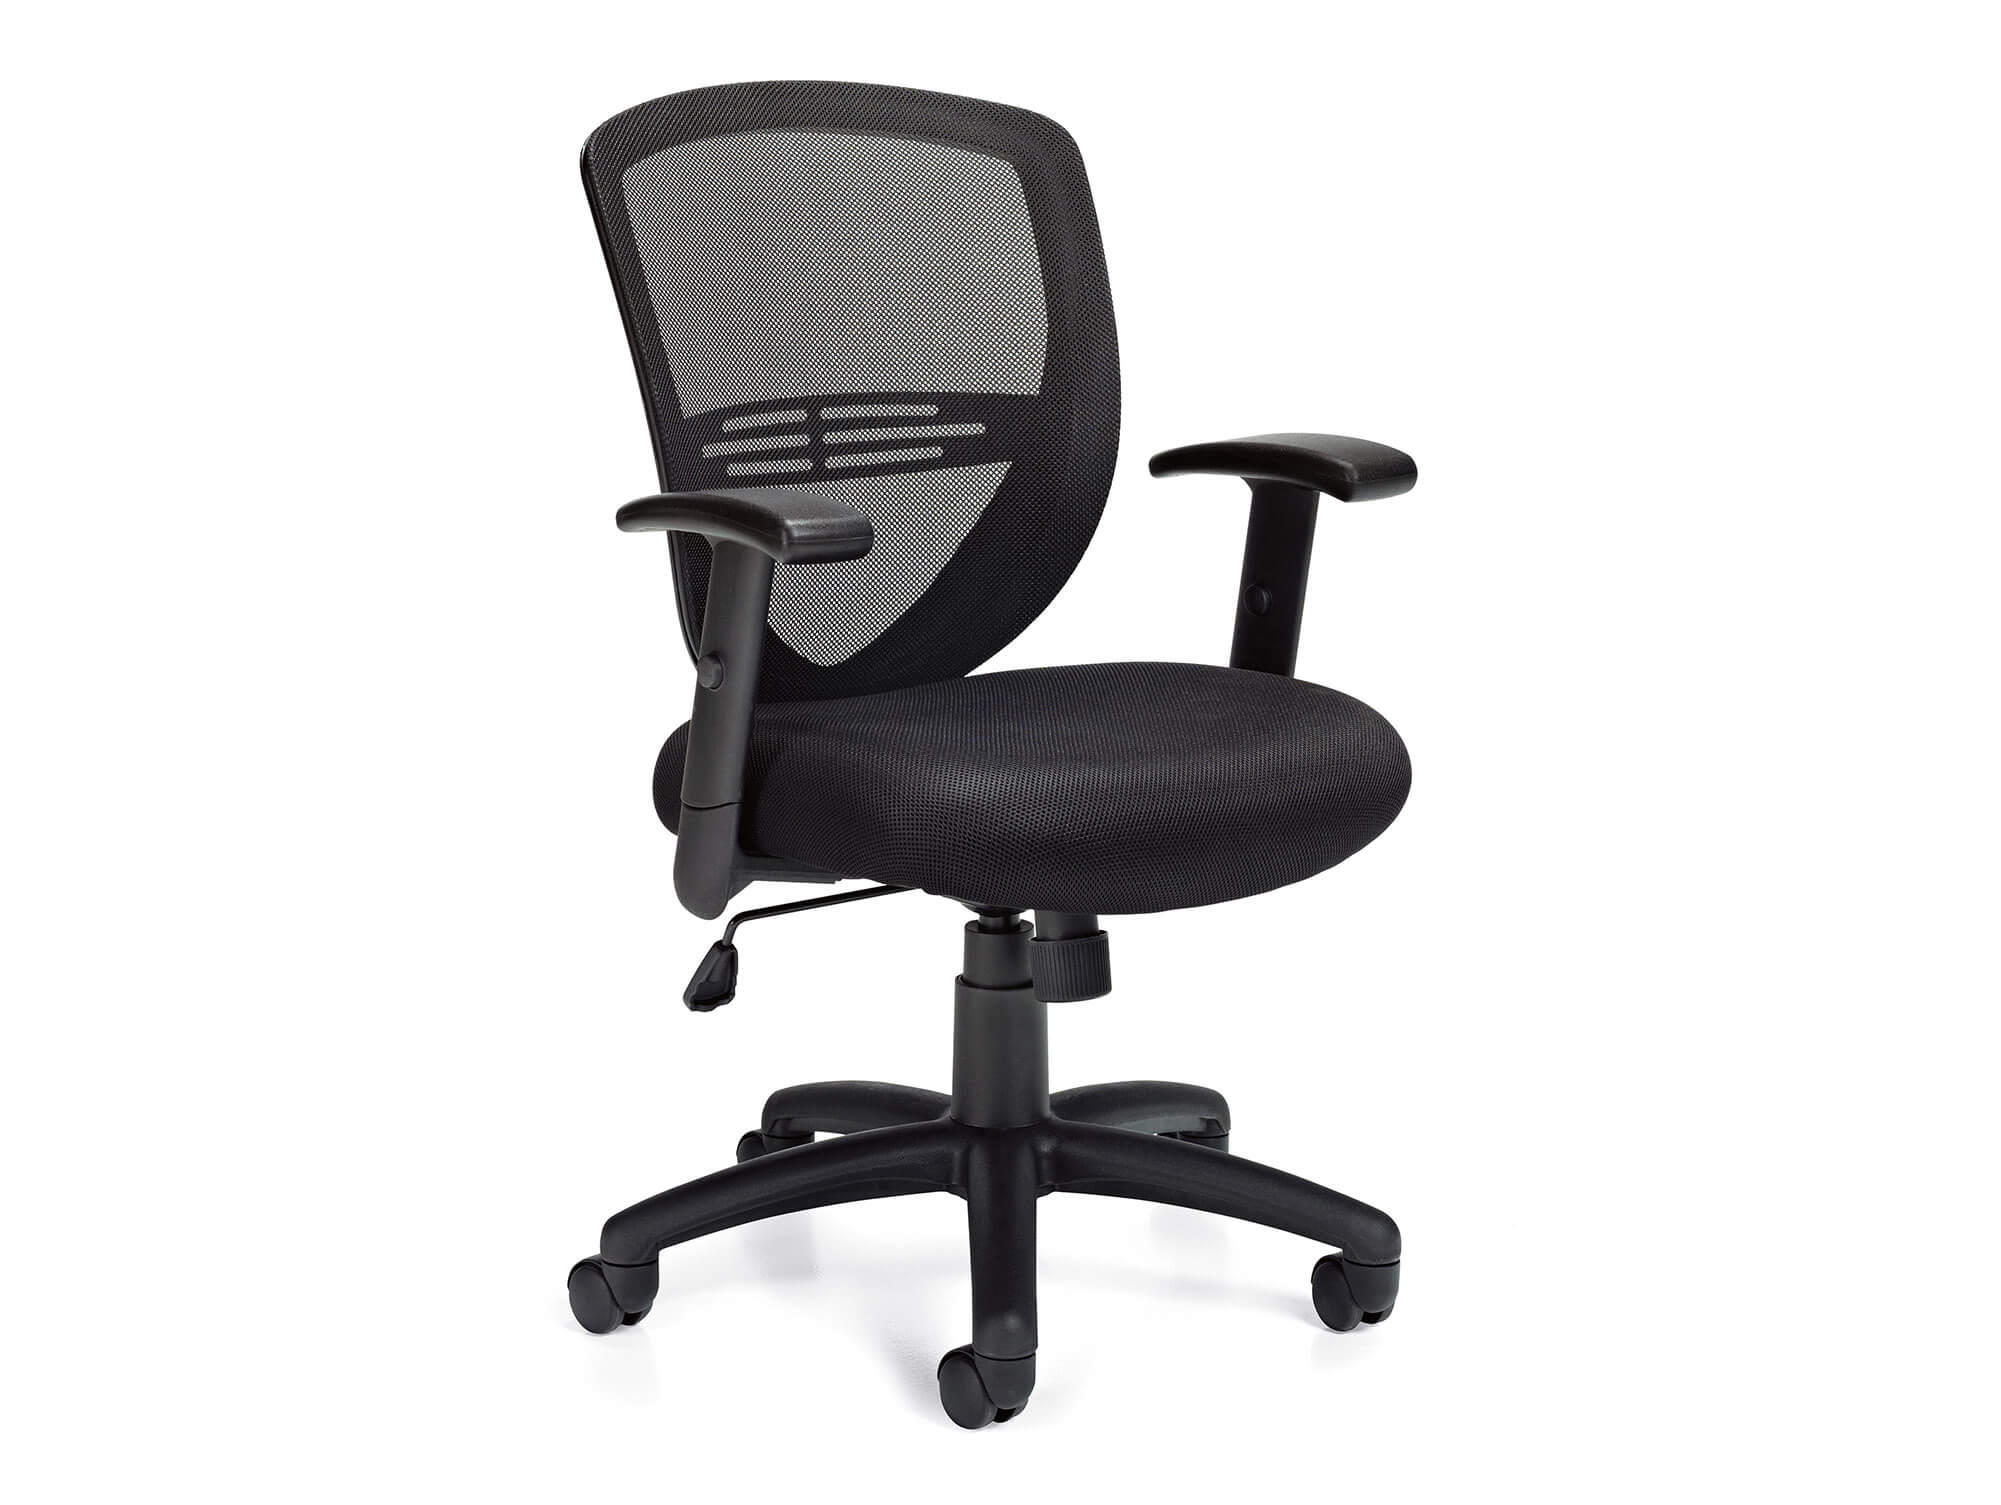 chairs-for-office-mesh-desk-chair.jpg